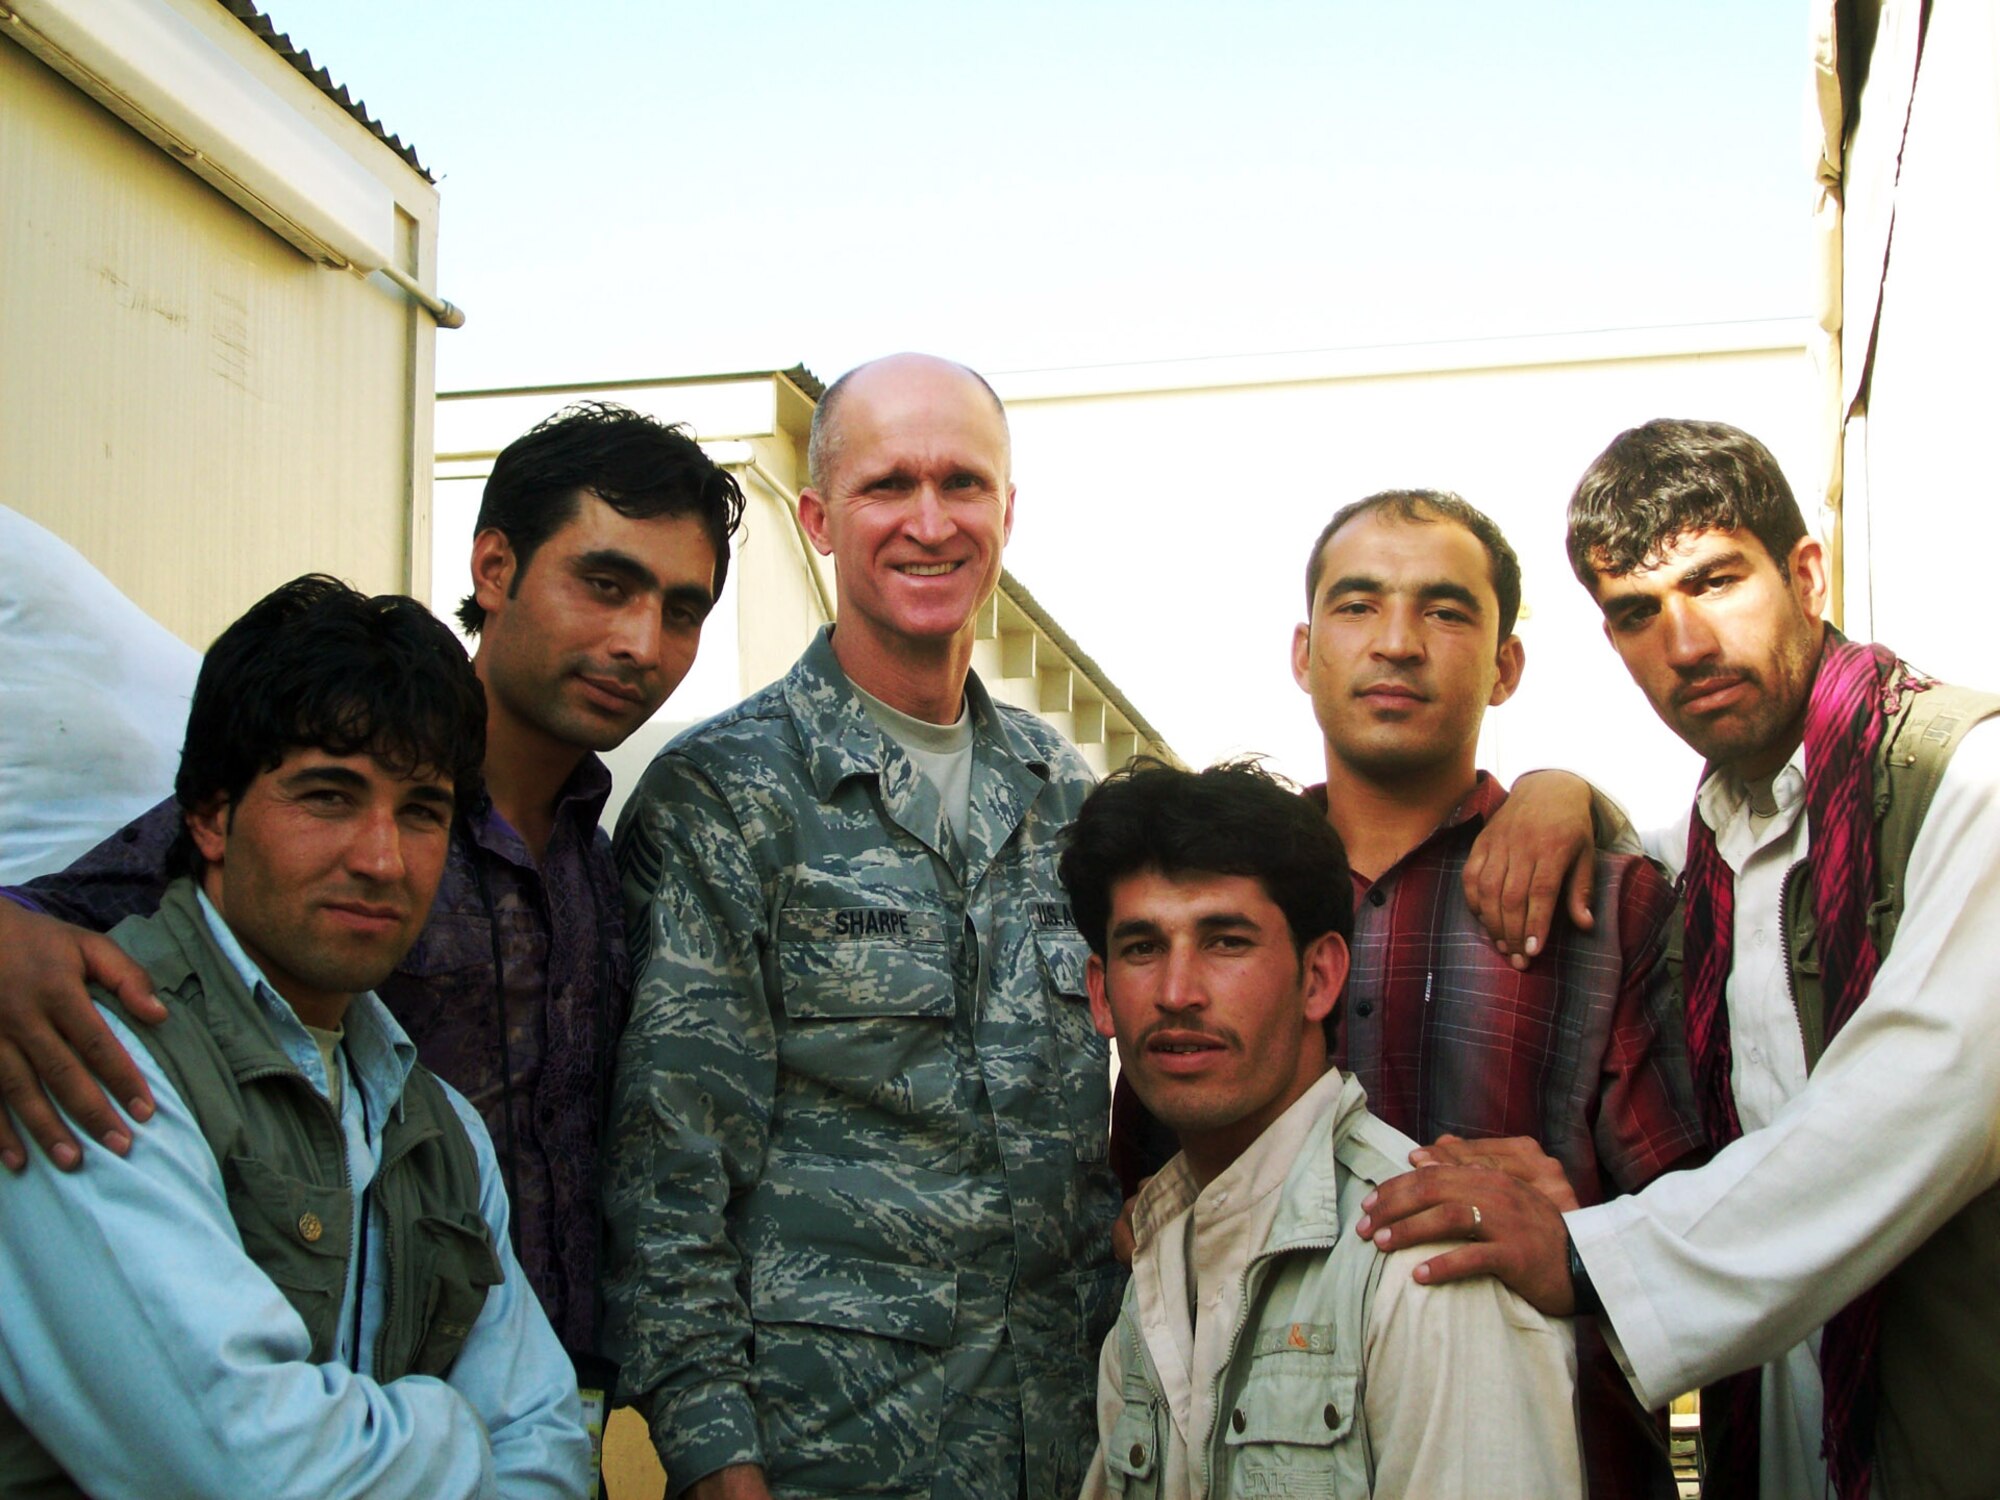 Chief Master Sgt. Bud Sharpe, 36th Civil Engineer Squadron superintendent, poses with Afghan workers that he got to know in over the course of his deployment from April to December 2010 on Bagram Airfield, Afghanistan. Thousands of local workers are employed as custodians, food service professionals and other various occupations on-base. (U.S. Air Force Courtesy Photo)